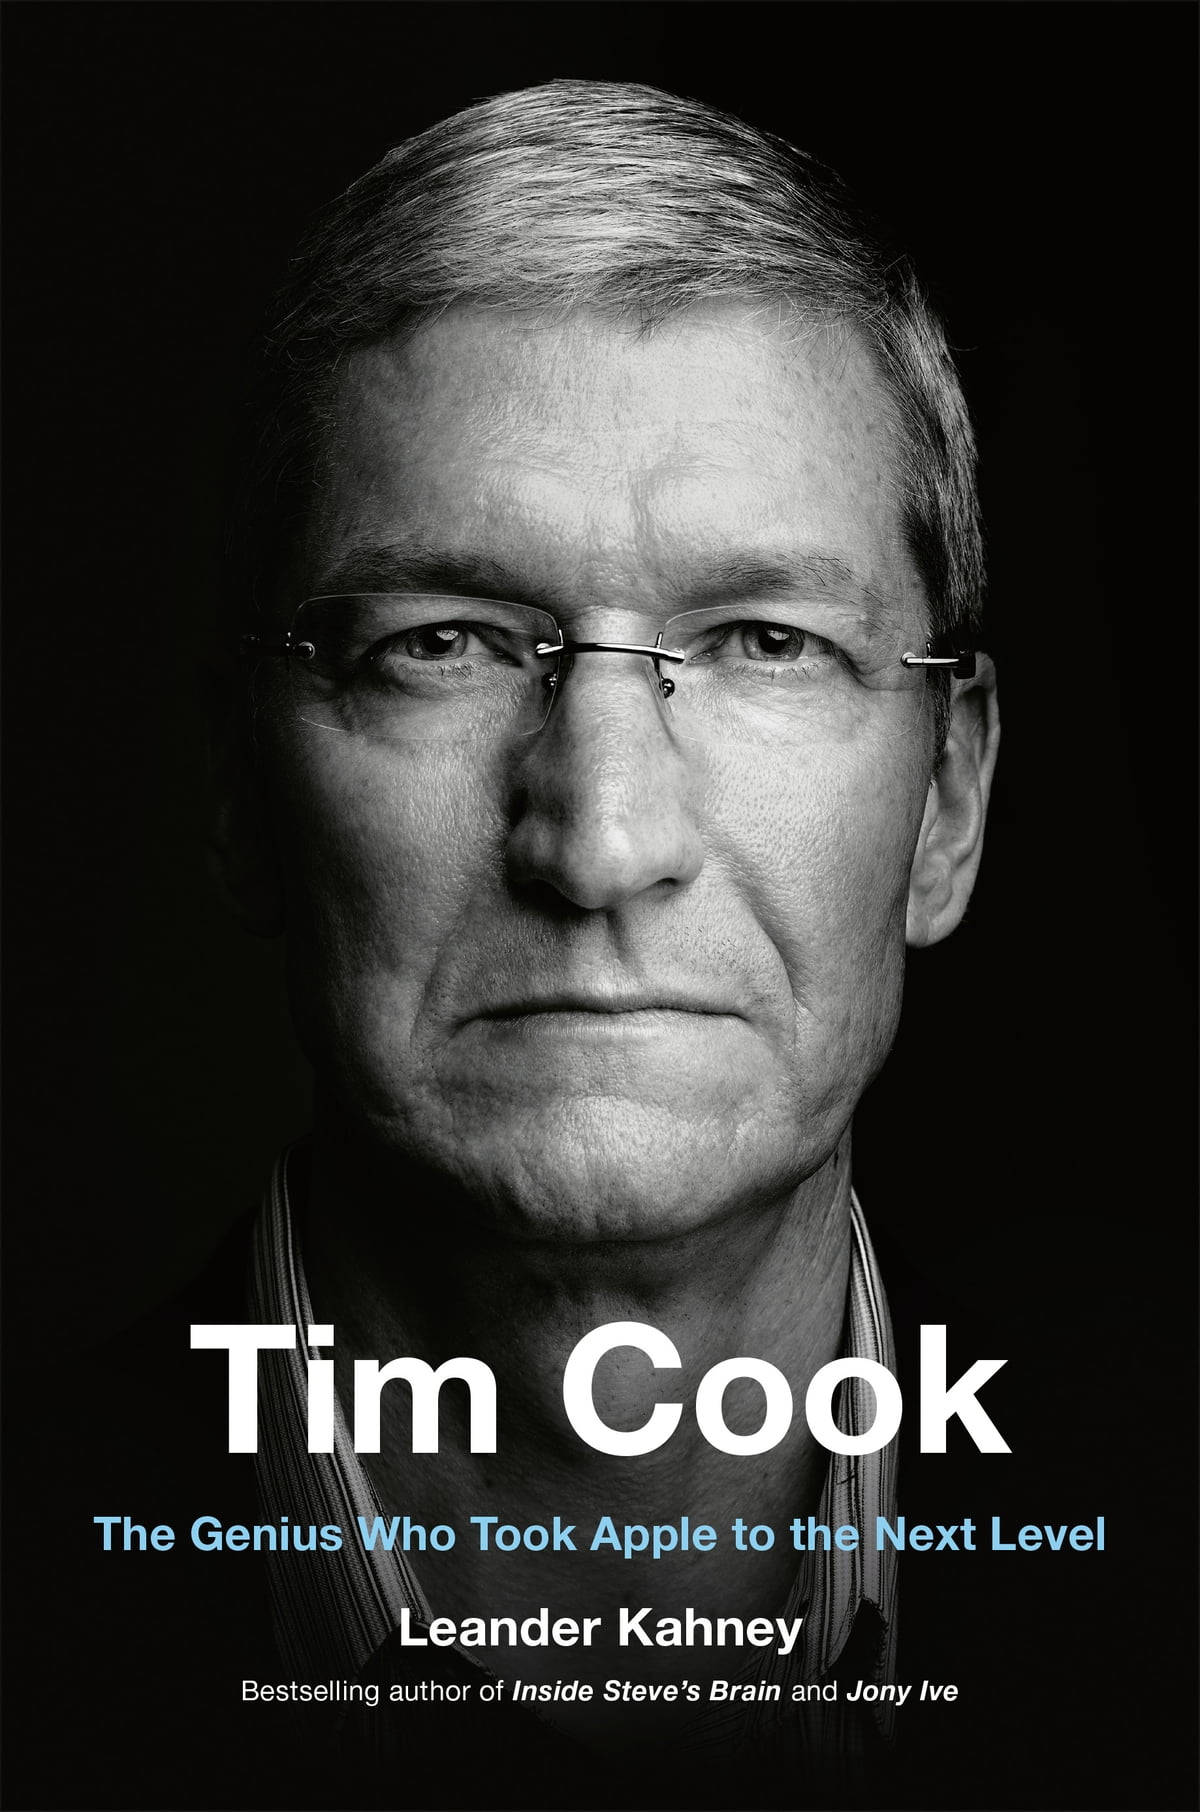 Ceo Tim Cook Book Cover Wallpaper